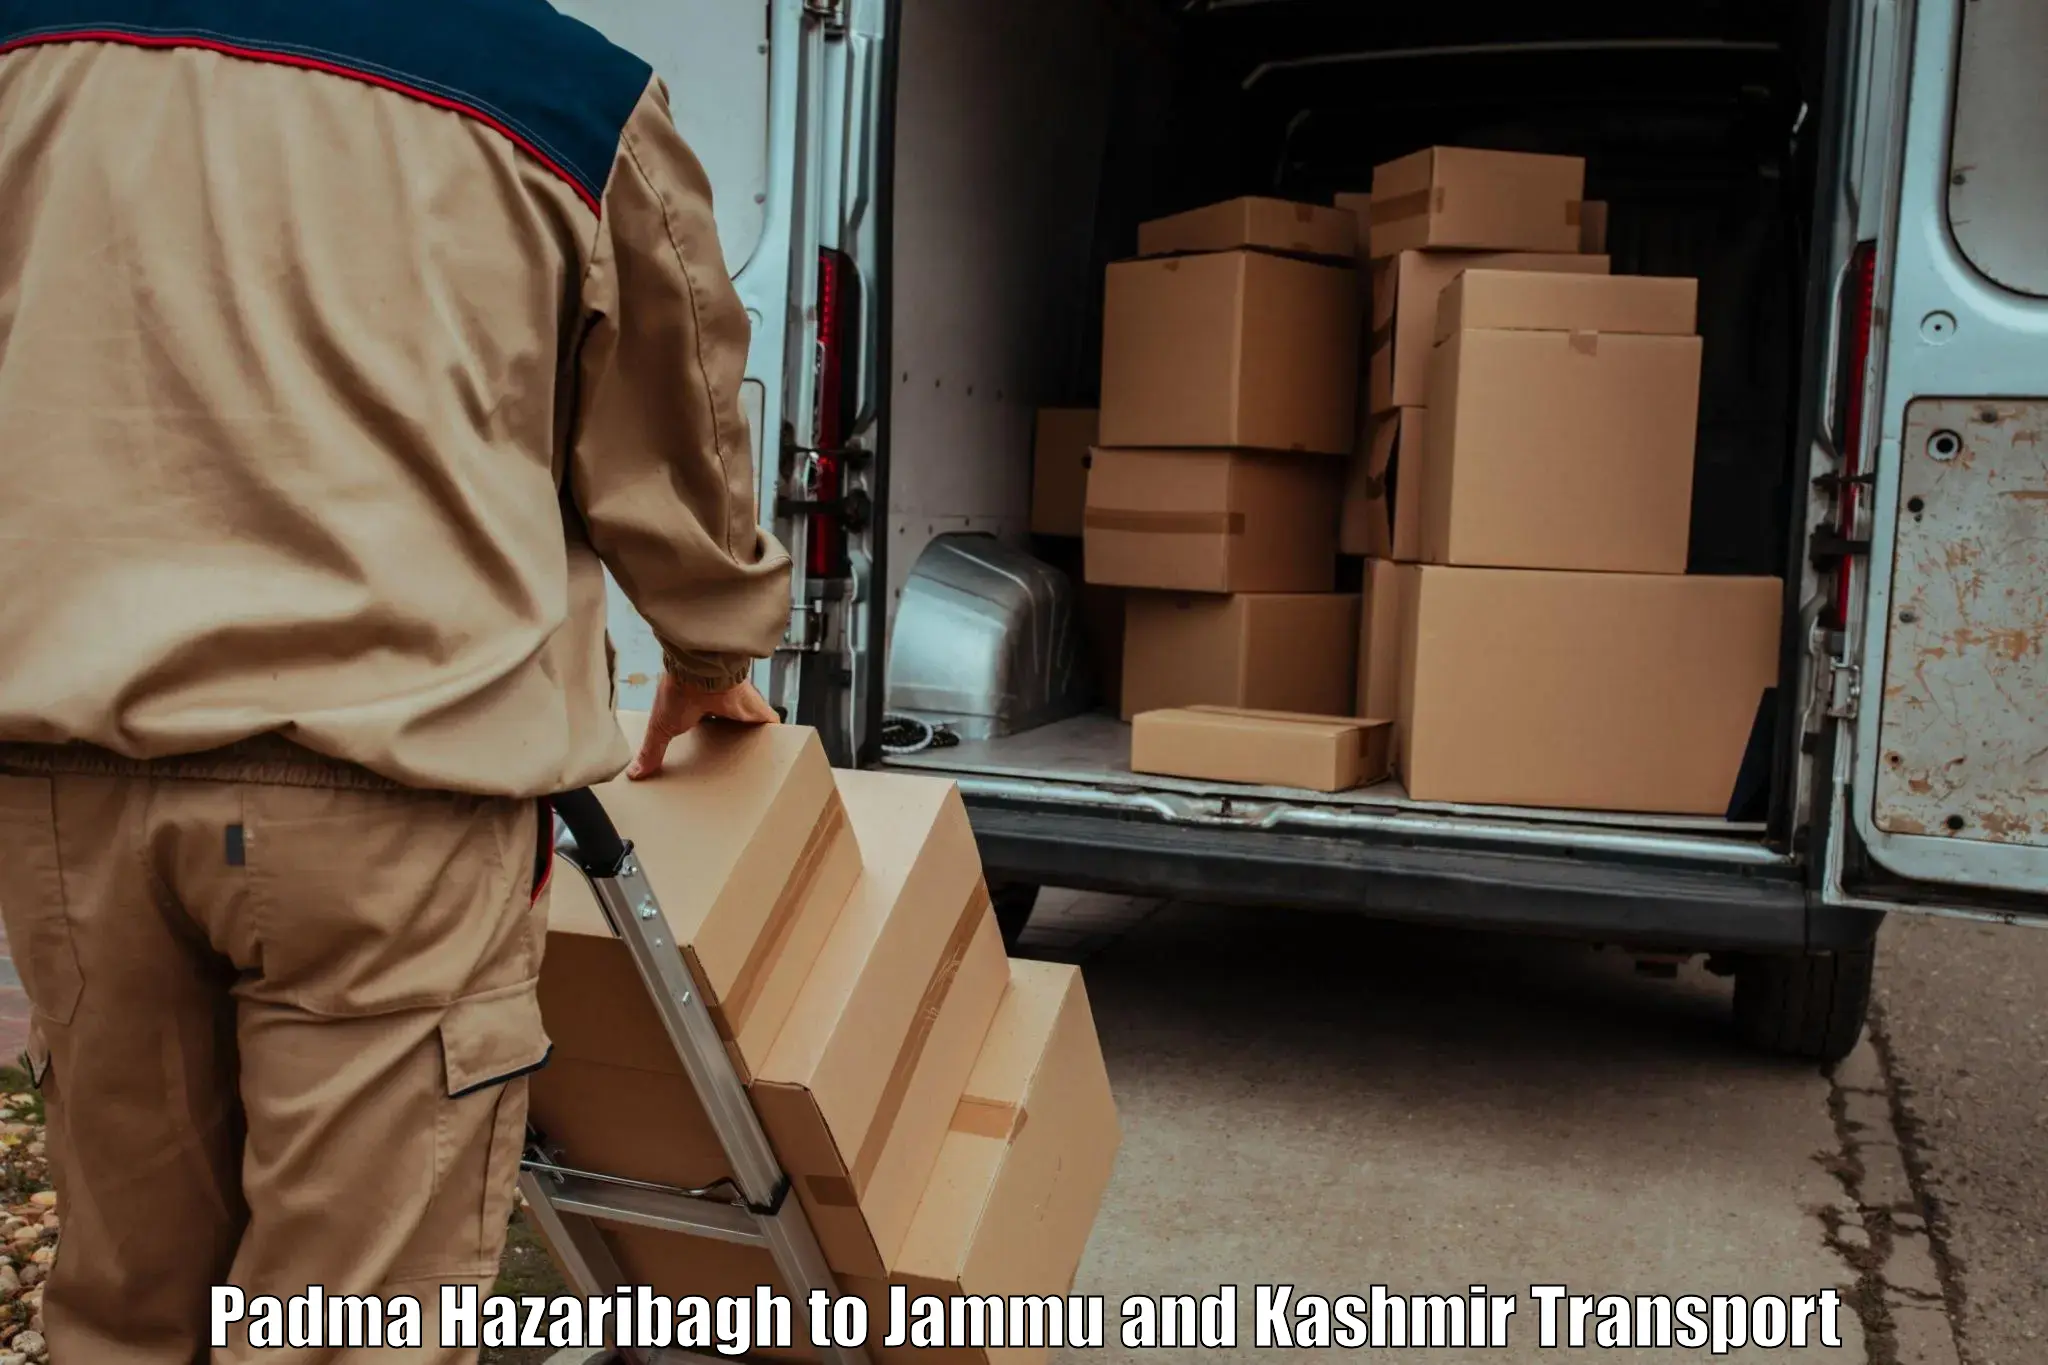 Luggage transport services in Padma Hazaribagh to Jammu and Kashmir